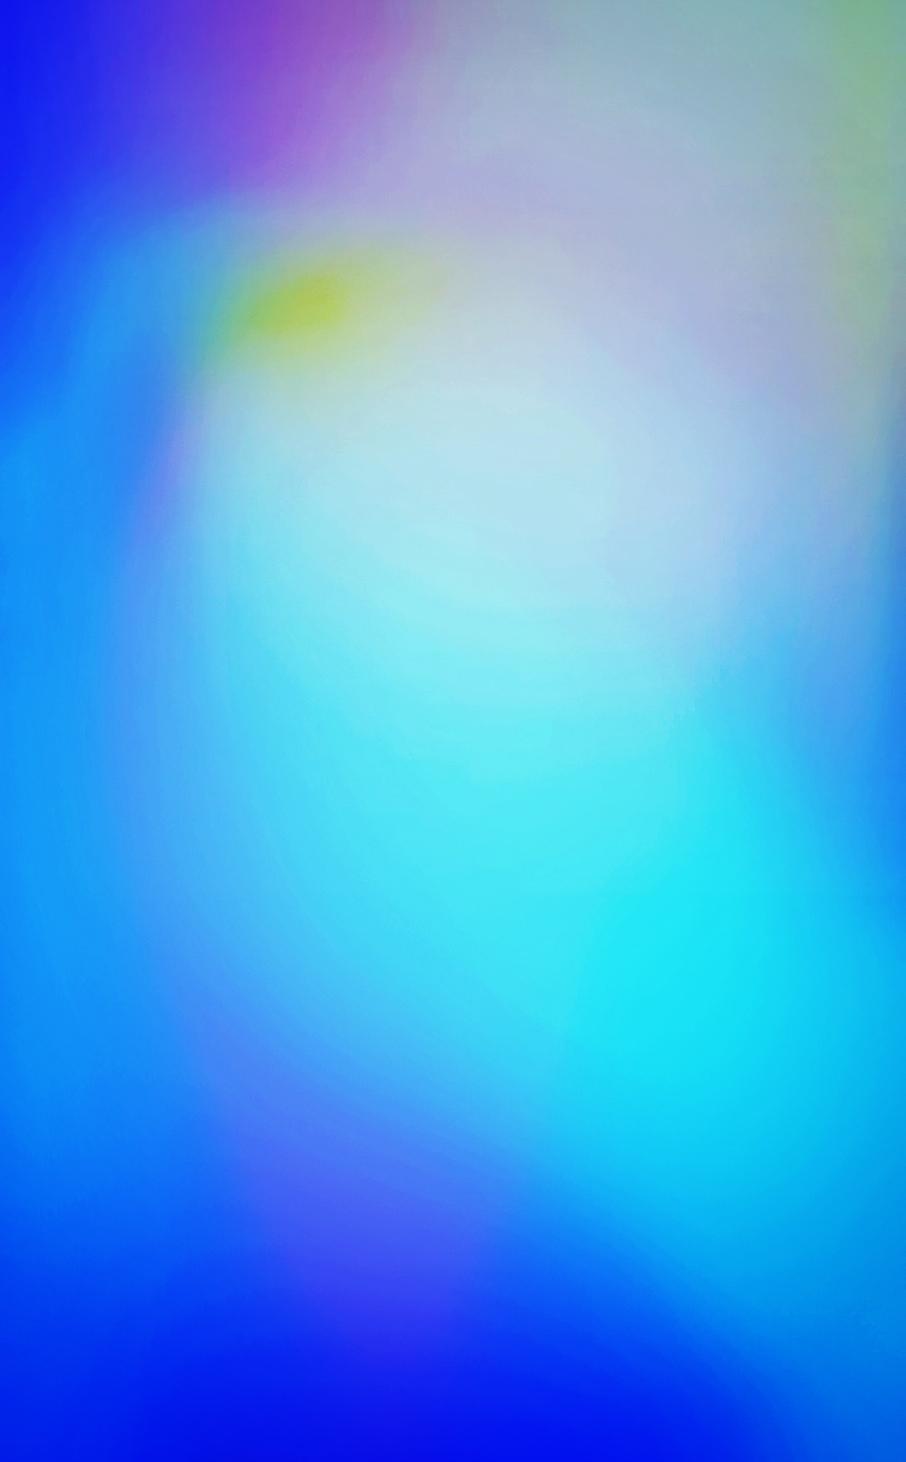 Colorfully Abstract Parallax Wallpaper Sized For The iPhone